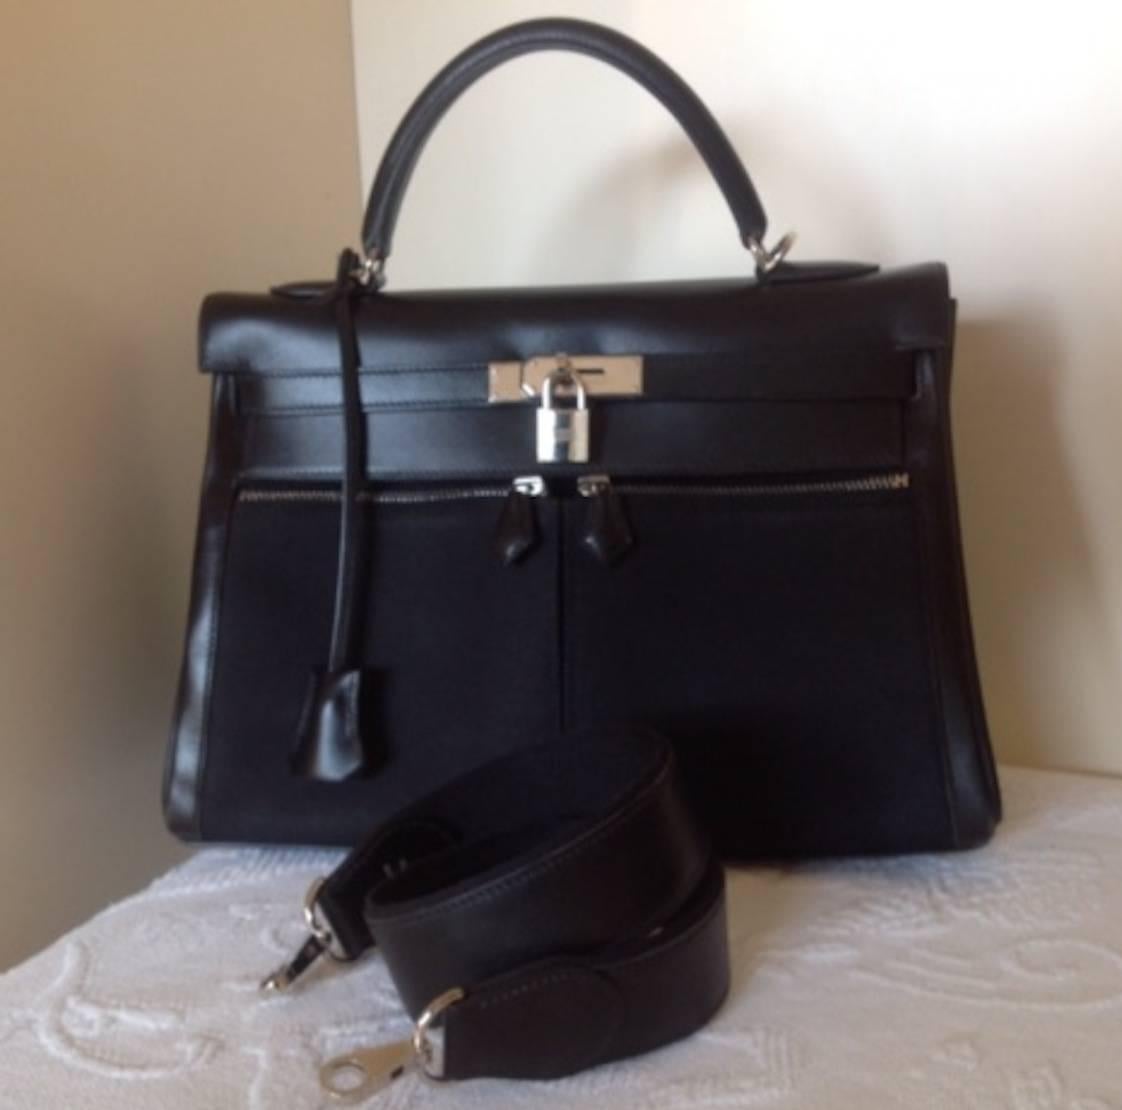 Hermes Kelly Lakis 32 Limited edition very hard to find.
Collector item, Leather black box Calf and canvas with Palladium Hardware
Has 3 zipper pockets two in front
And one reverse zipper  to the esteriore of the bag the bag in very good